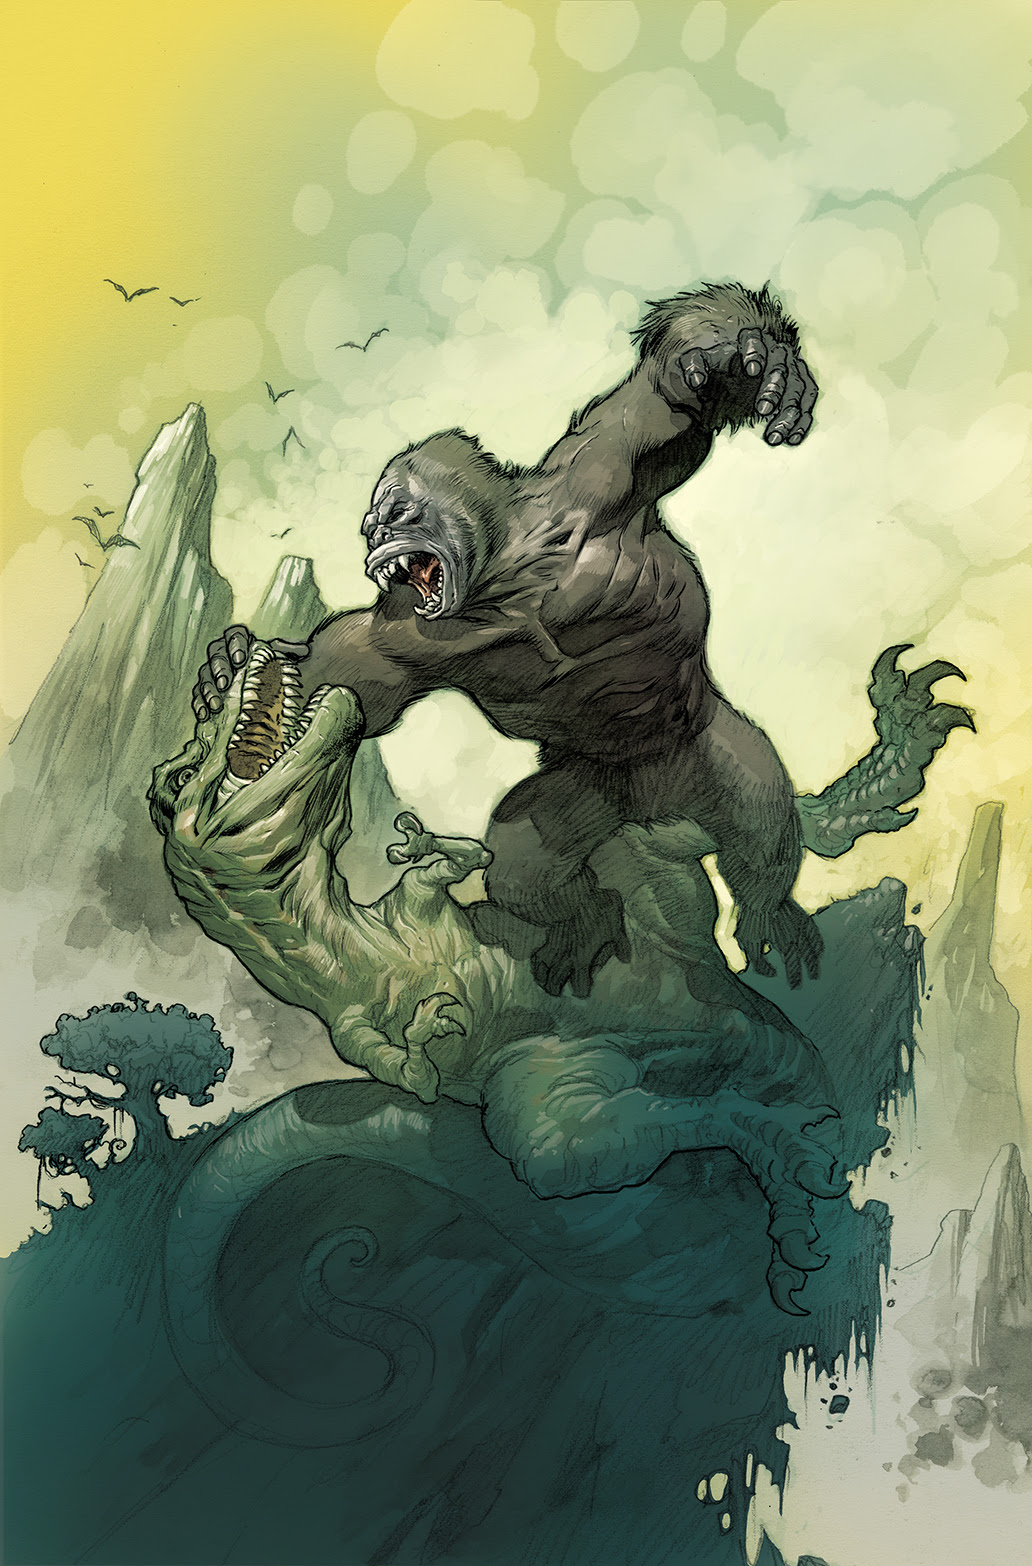 BOOM! Preview: Kong of Skull Island covers